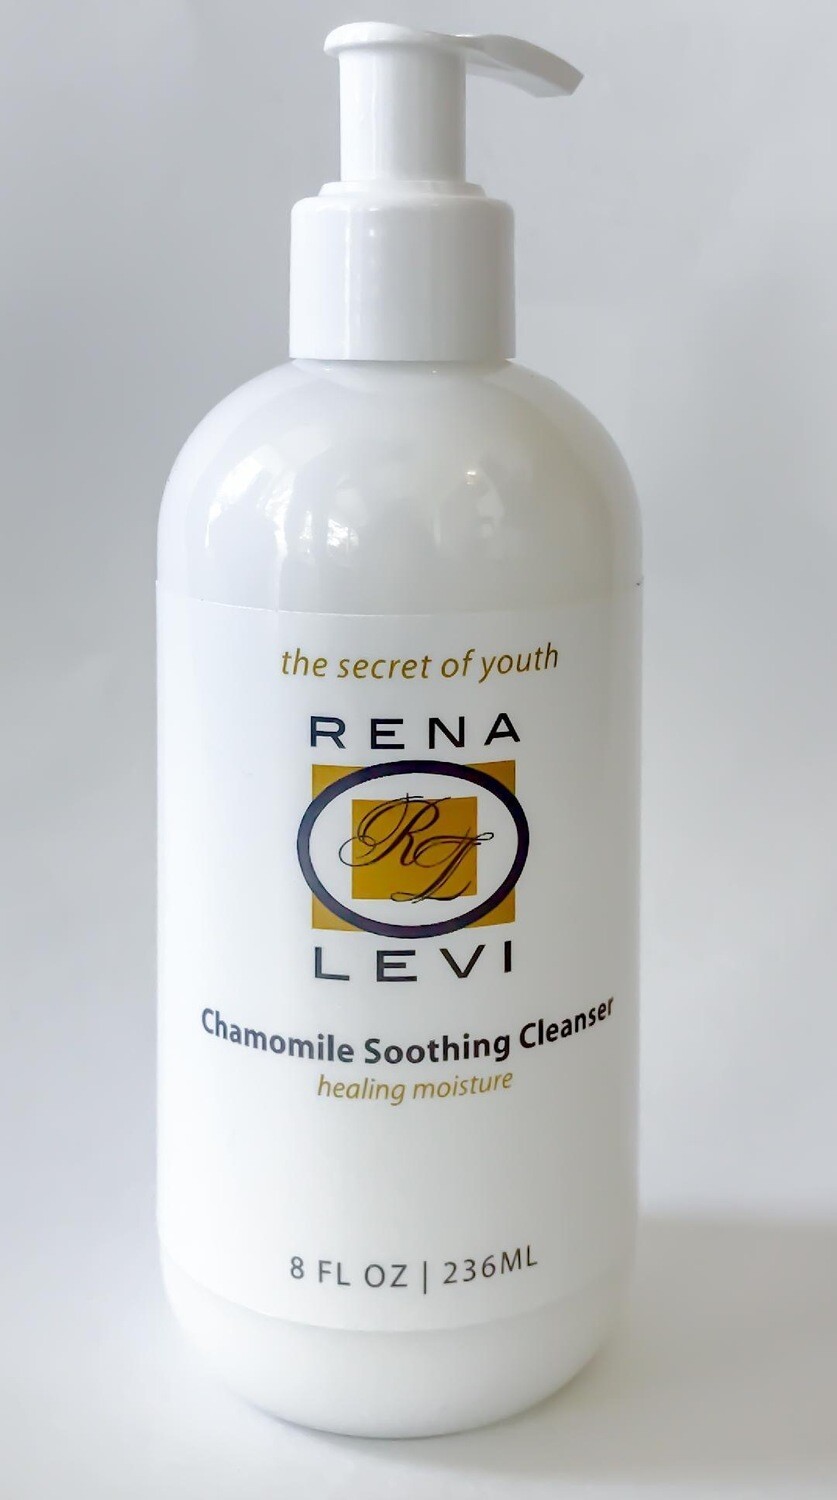 Chamomile Soothing Cleanser